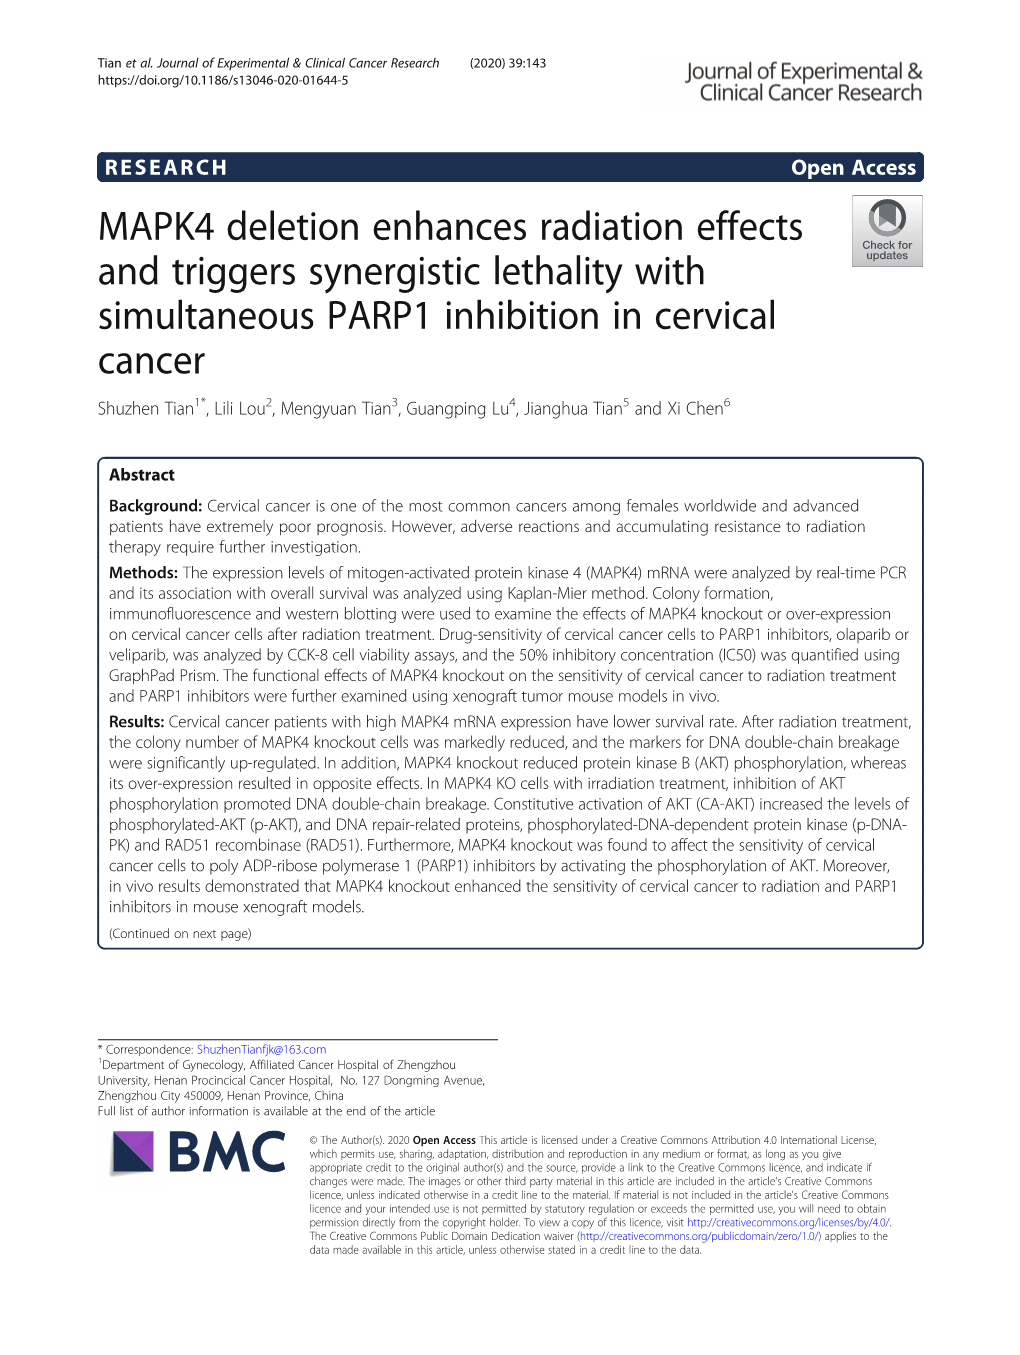 MAPK4 Deletion Enhances Radiation Effects and Triggers Synergistic